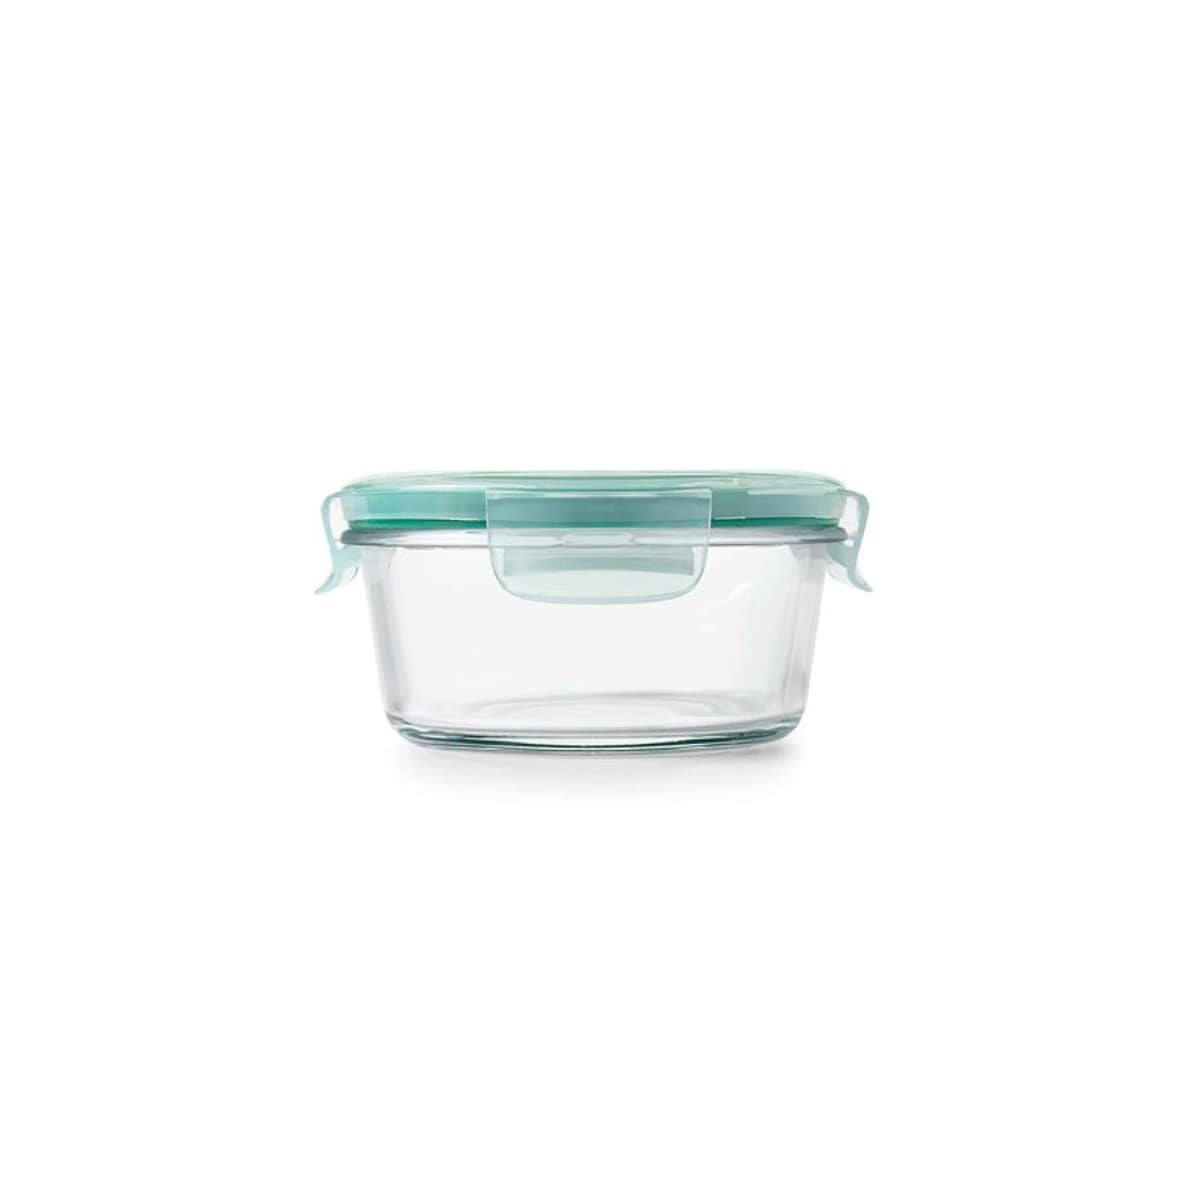 https://cdn.shopify.com/s/files/1/0474/2338/9856/products/oxo-oxo-good-grips-snap-glass-round-container-2-cup-29357-20086274195616_1600x.jpg?v=1628218602